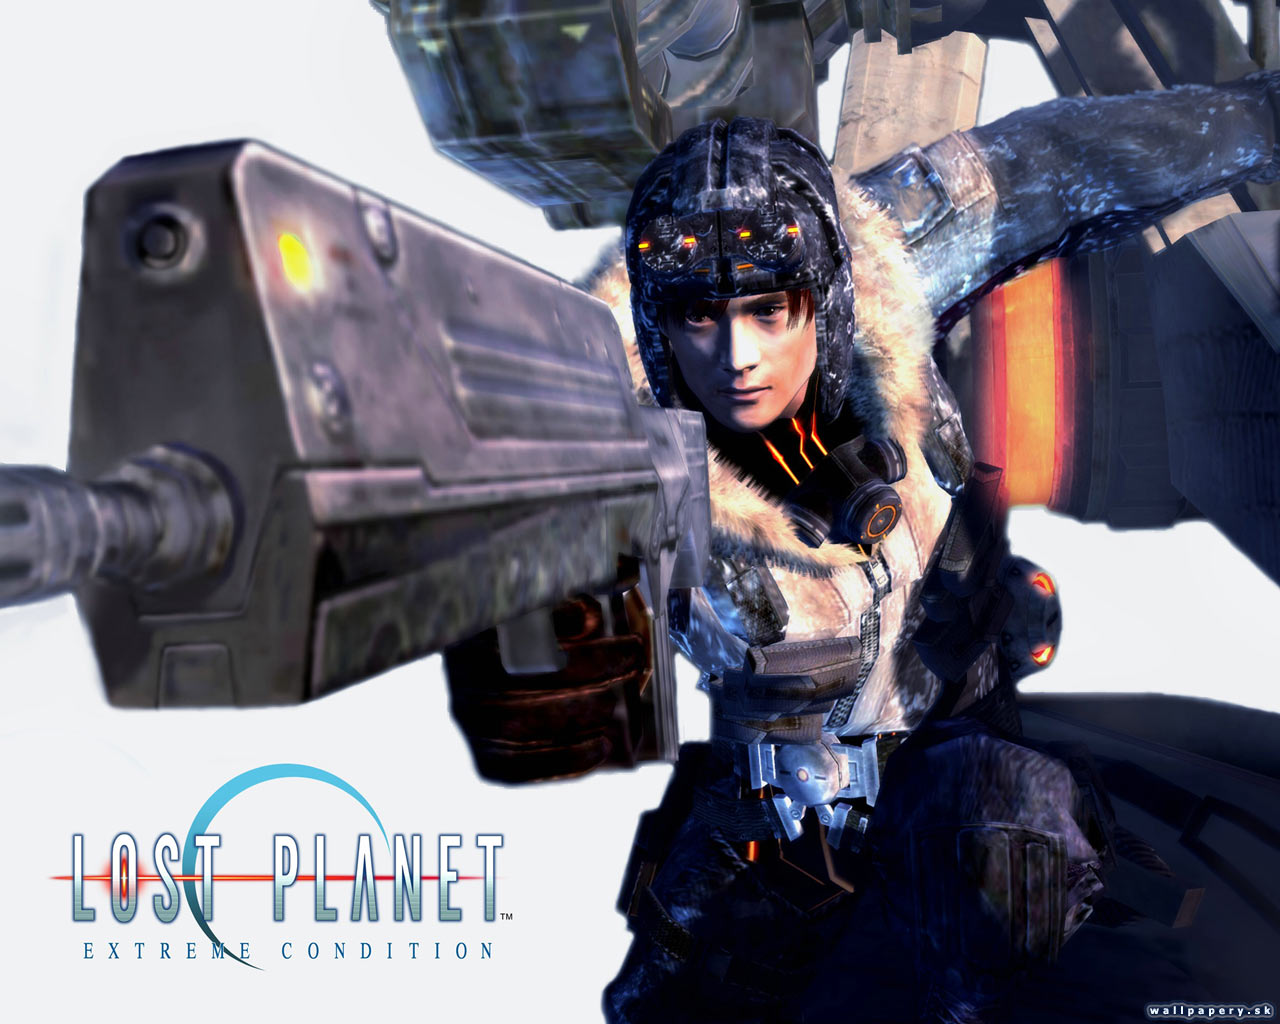 Lost Planet: Extreme Condition - wallpaper 17